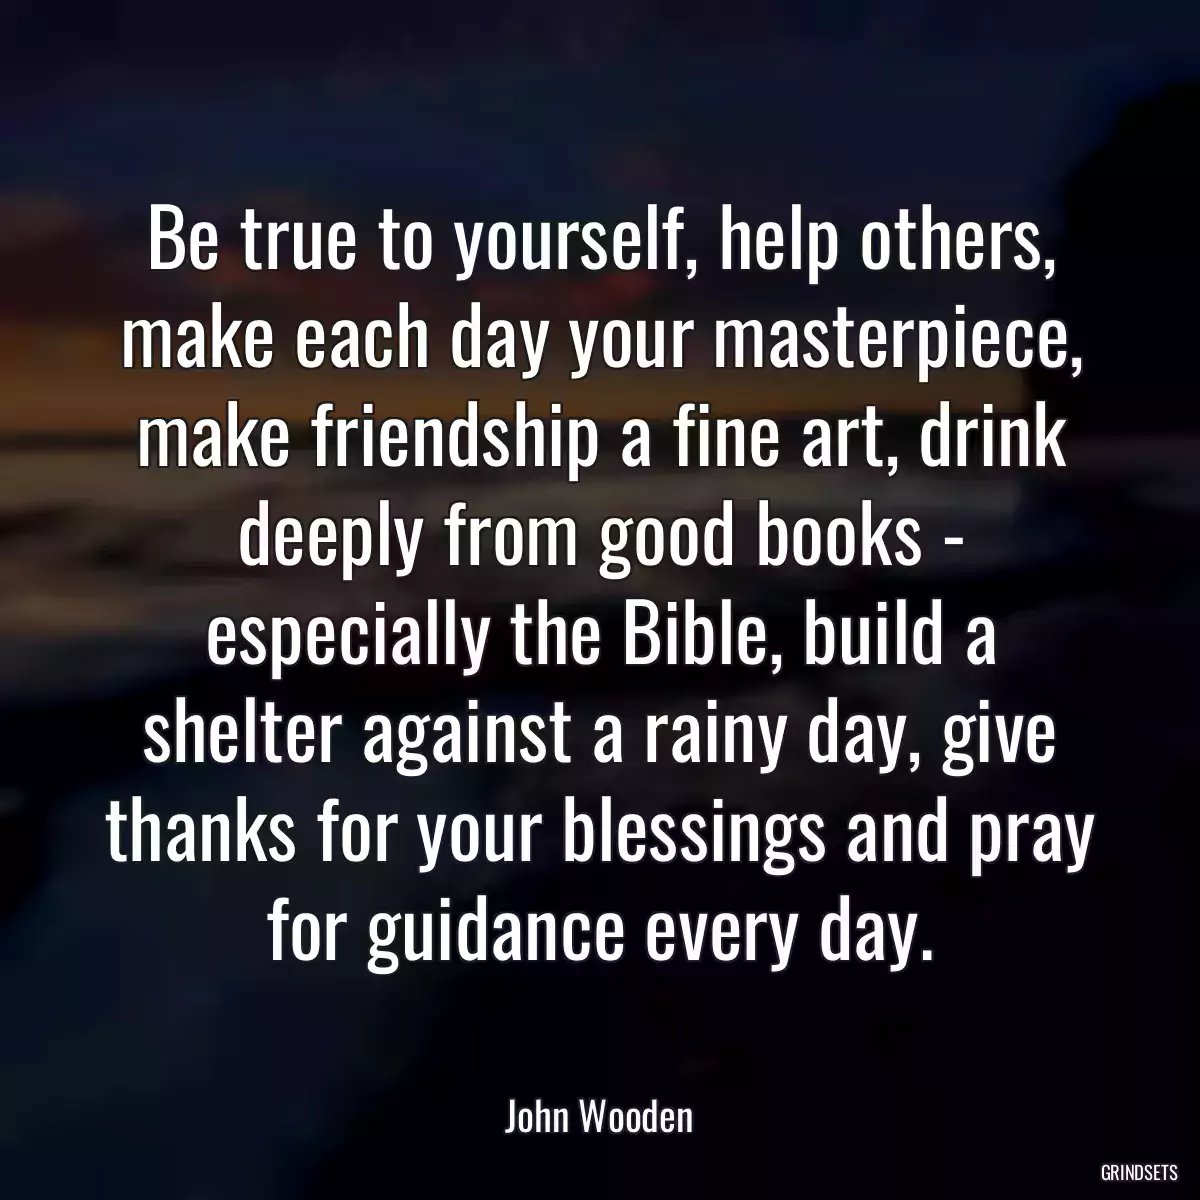 Be true to yourself, help others, make each day your masterpiece, make friendship a fine art, drink deeply from good books - especially the Bible, build a shelter against a rainy day, give thanks for your blessings and pray for guidance every day.